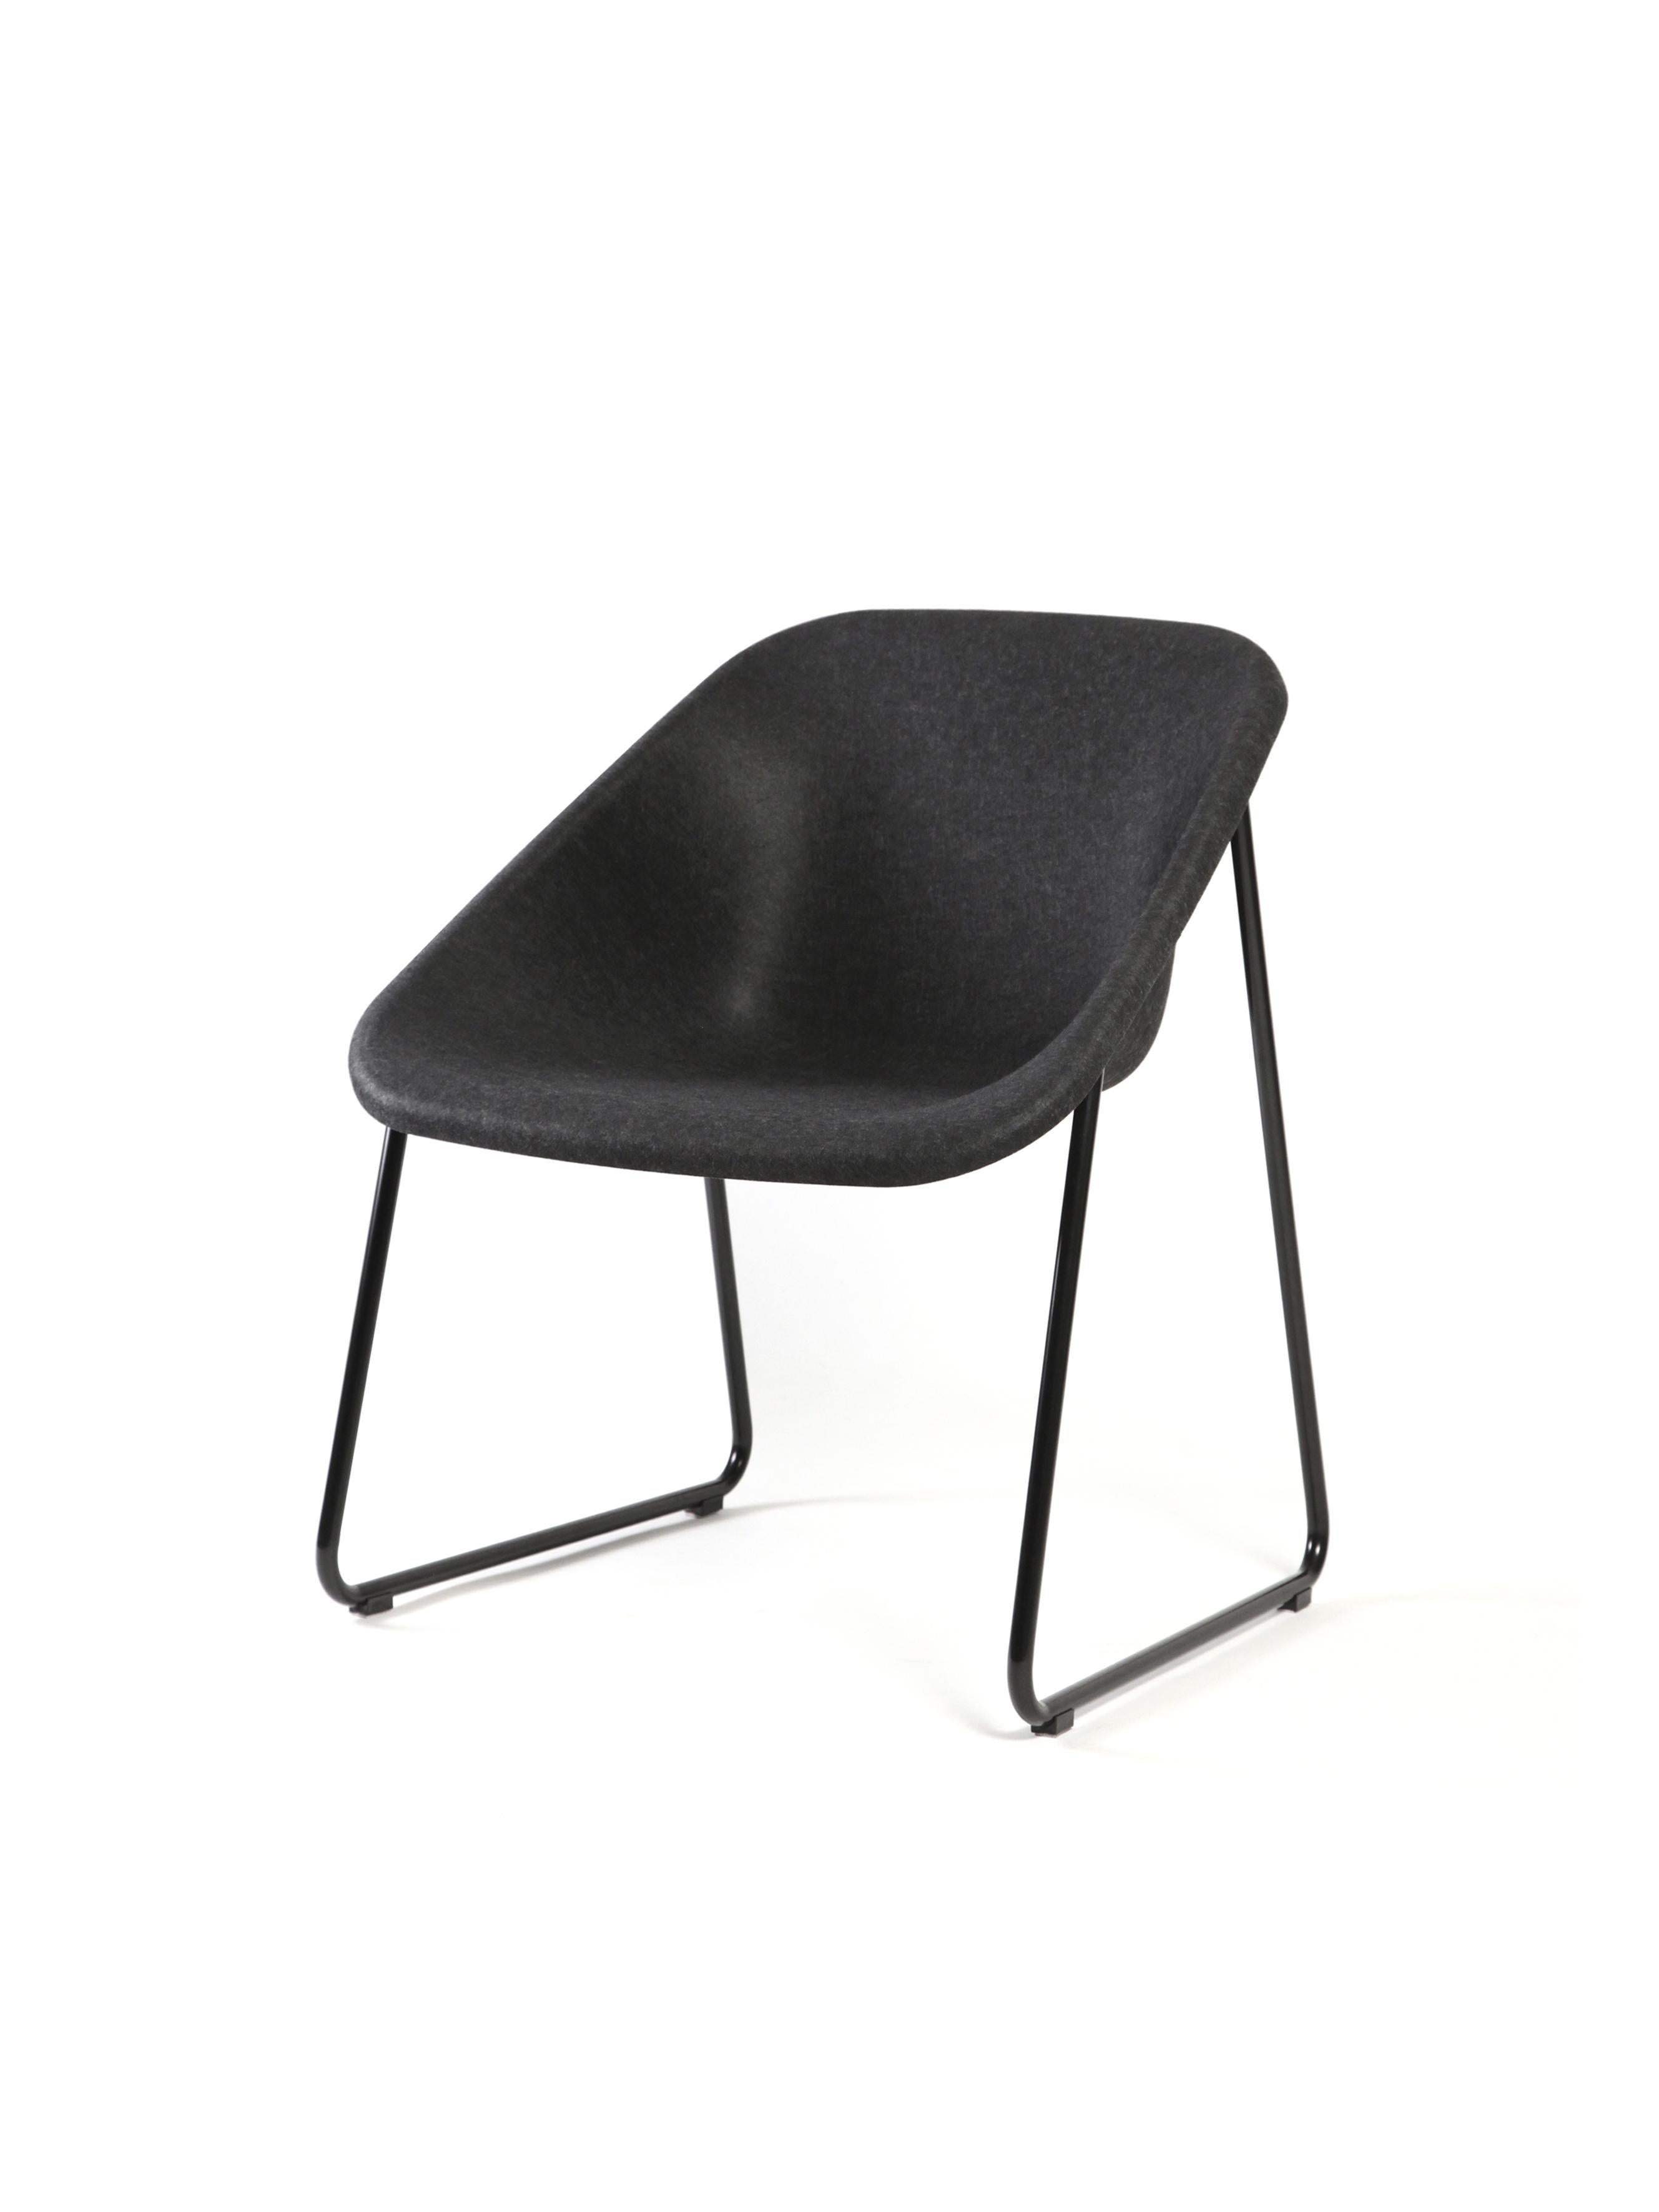 Customizable Inno Kola Light Chair by Mikko Laakonen In New Condition For Sale In New York, NY